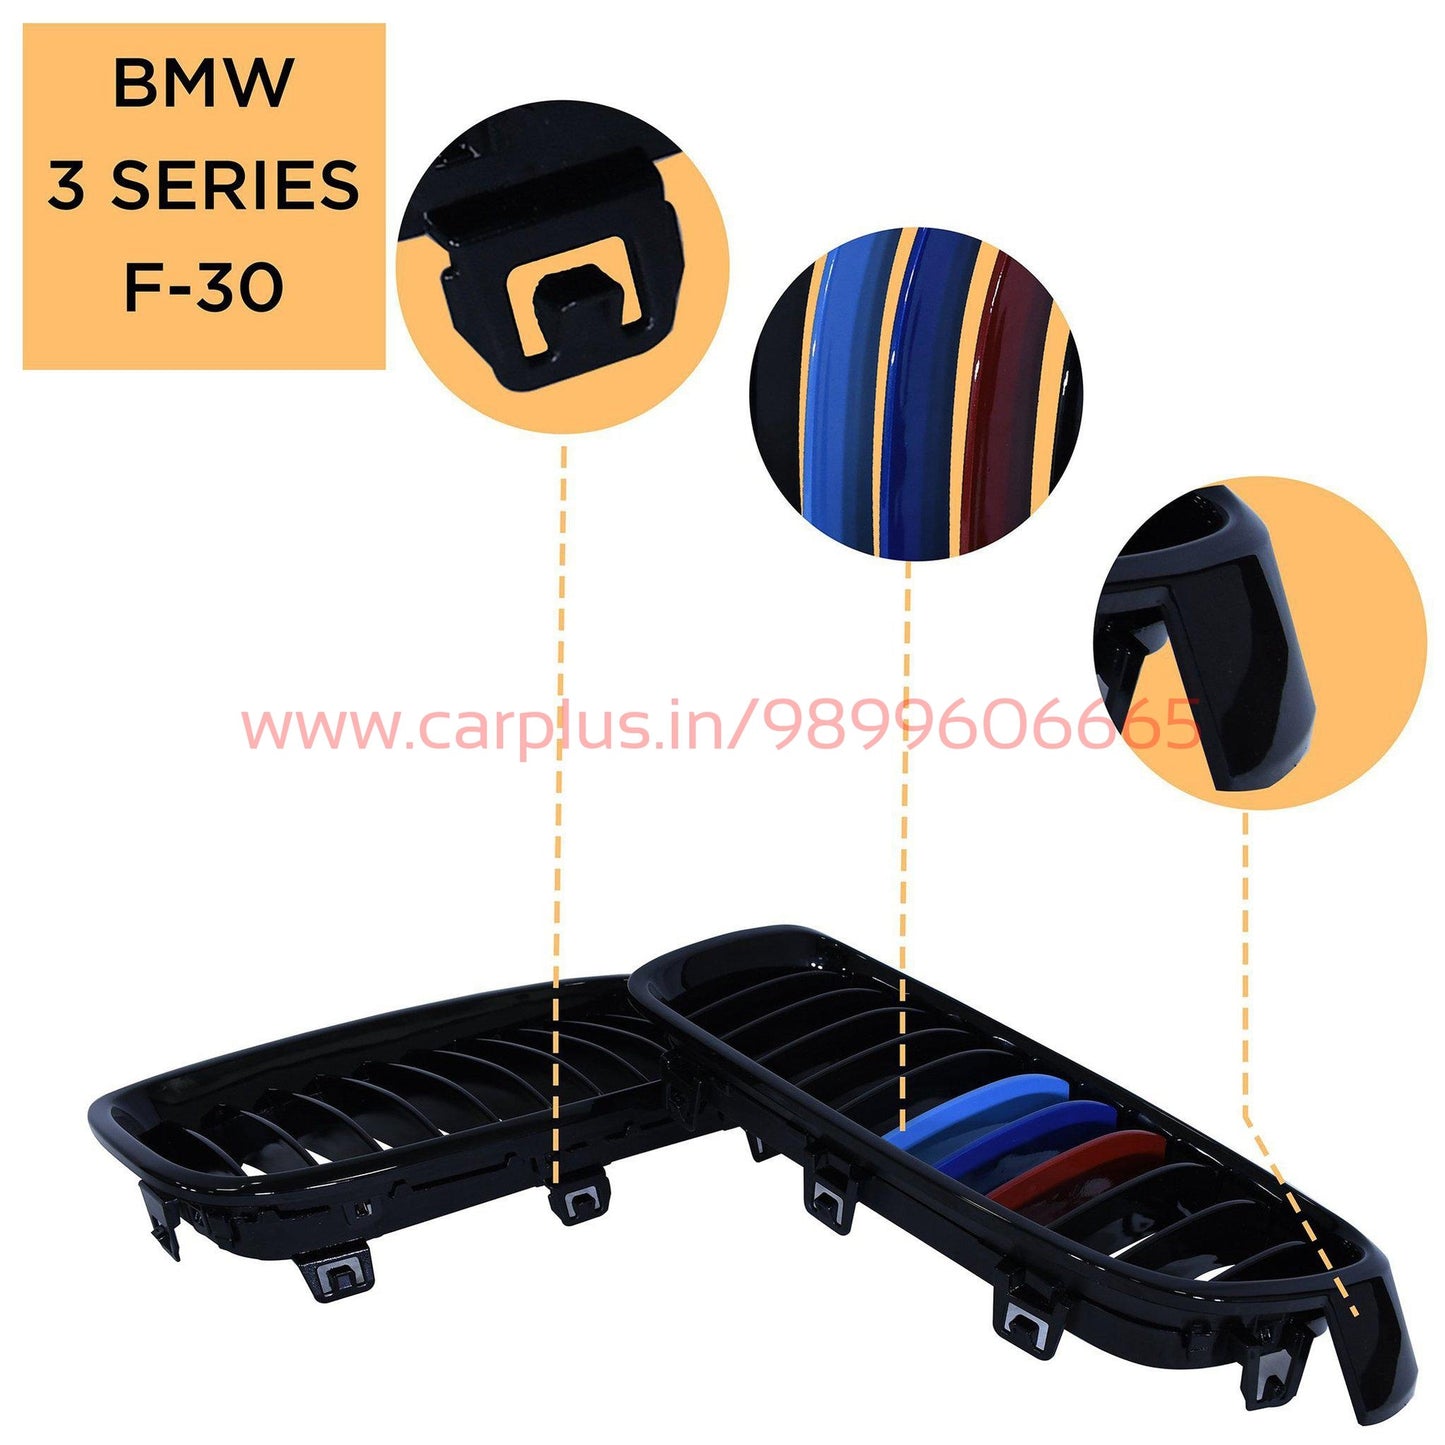 
                  
                    KMH Front Grill for BMW 3 Series F30 KMH-GRILL GRILLS.
                  
                